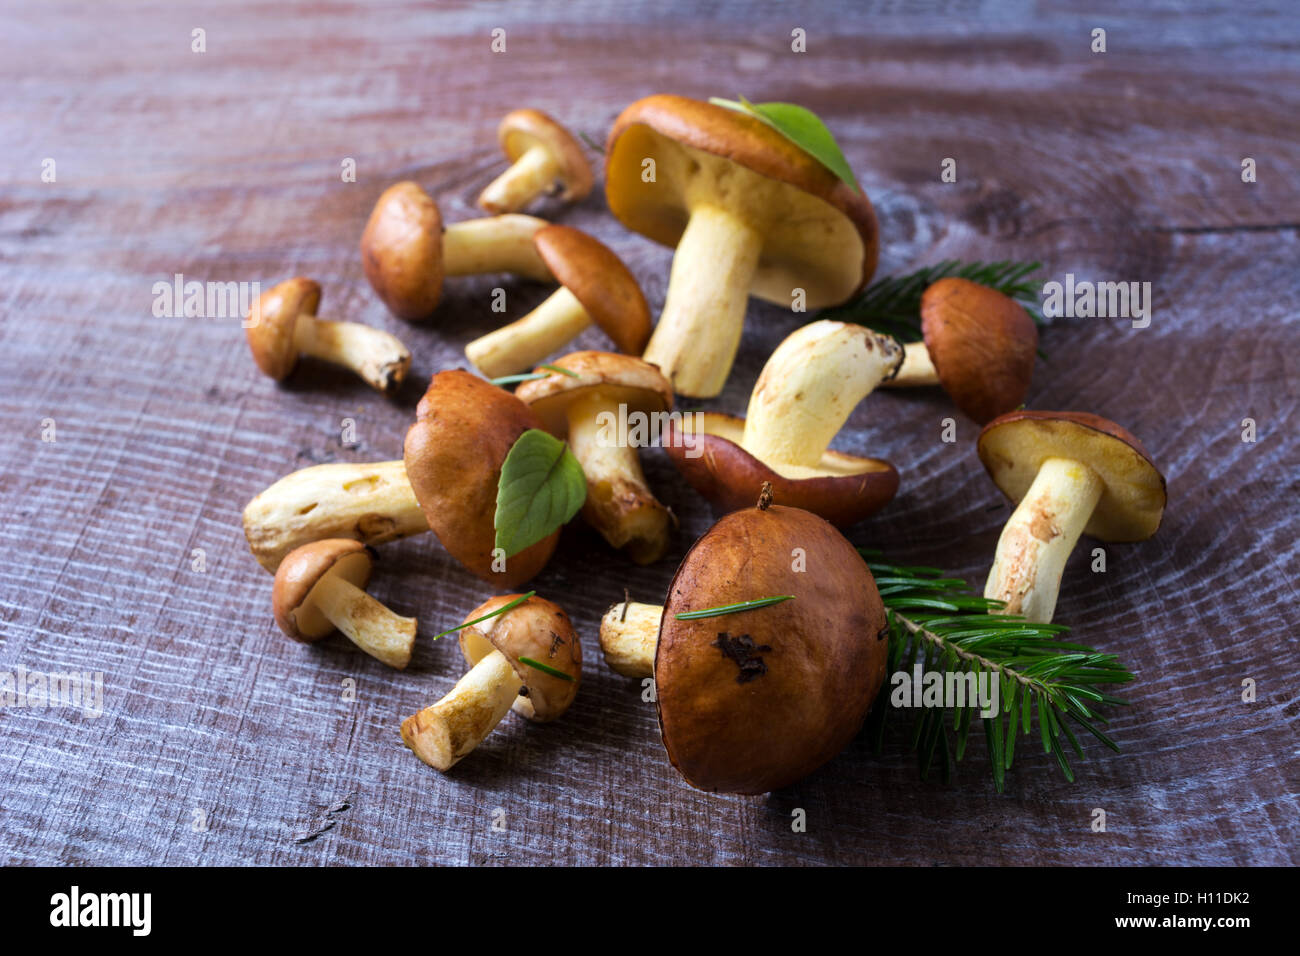 Forest picking mushrooms on the wooden background selective focus. Fresh raw mushrooms on the table. Stock Photo